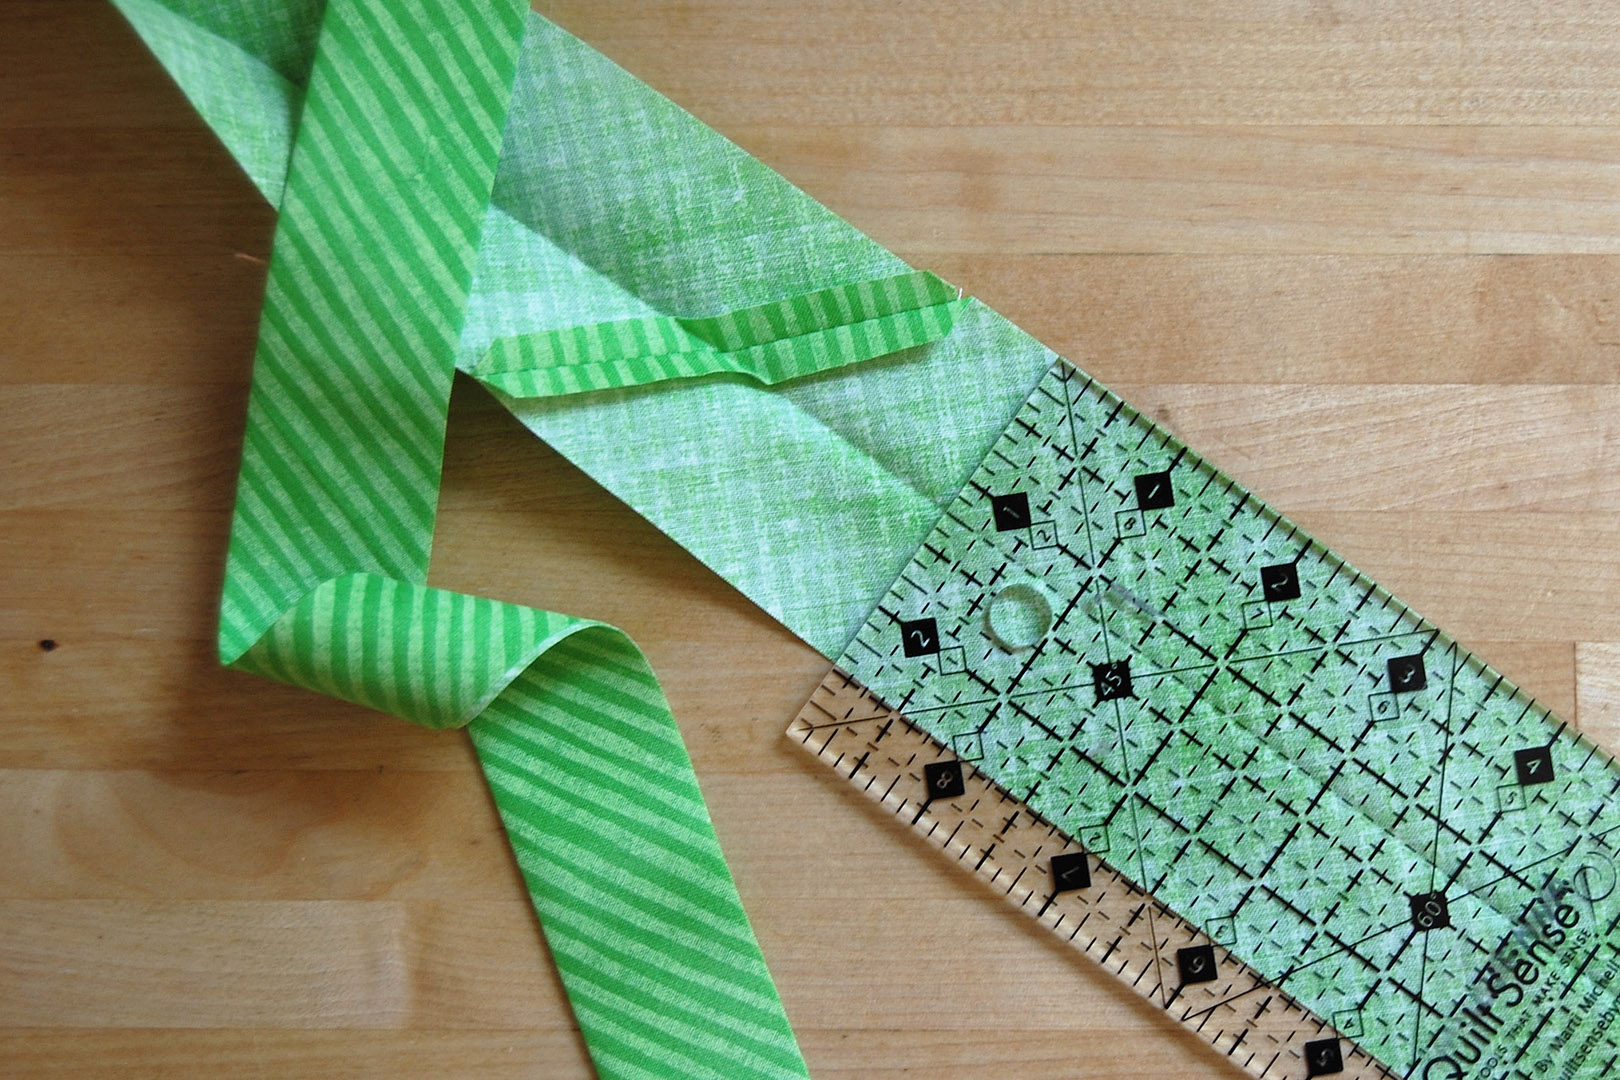 How to Make Bias Binding: A Step-By-Step Guide